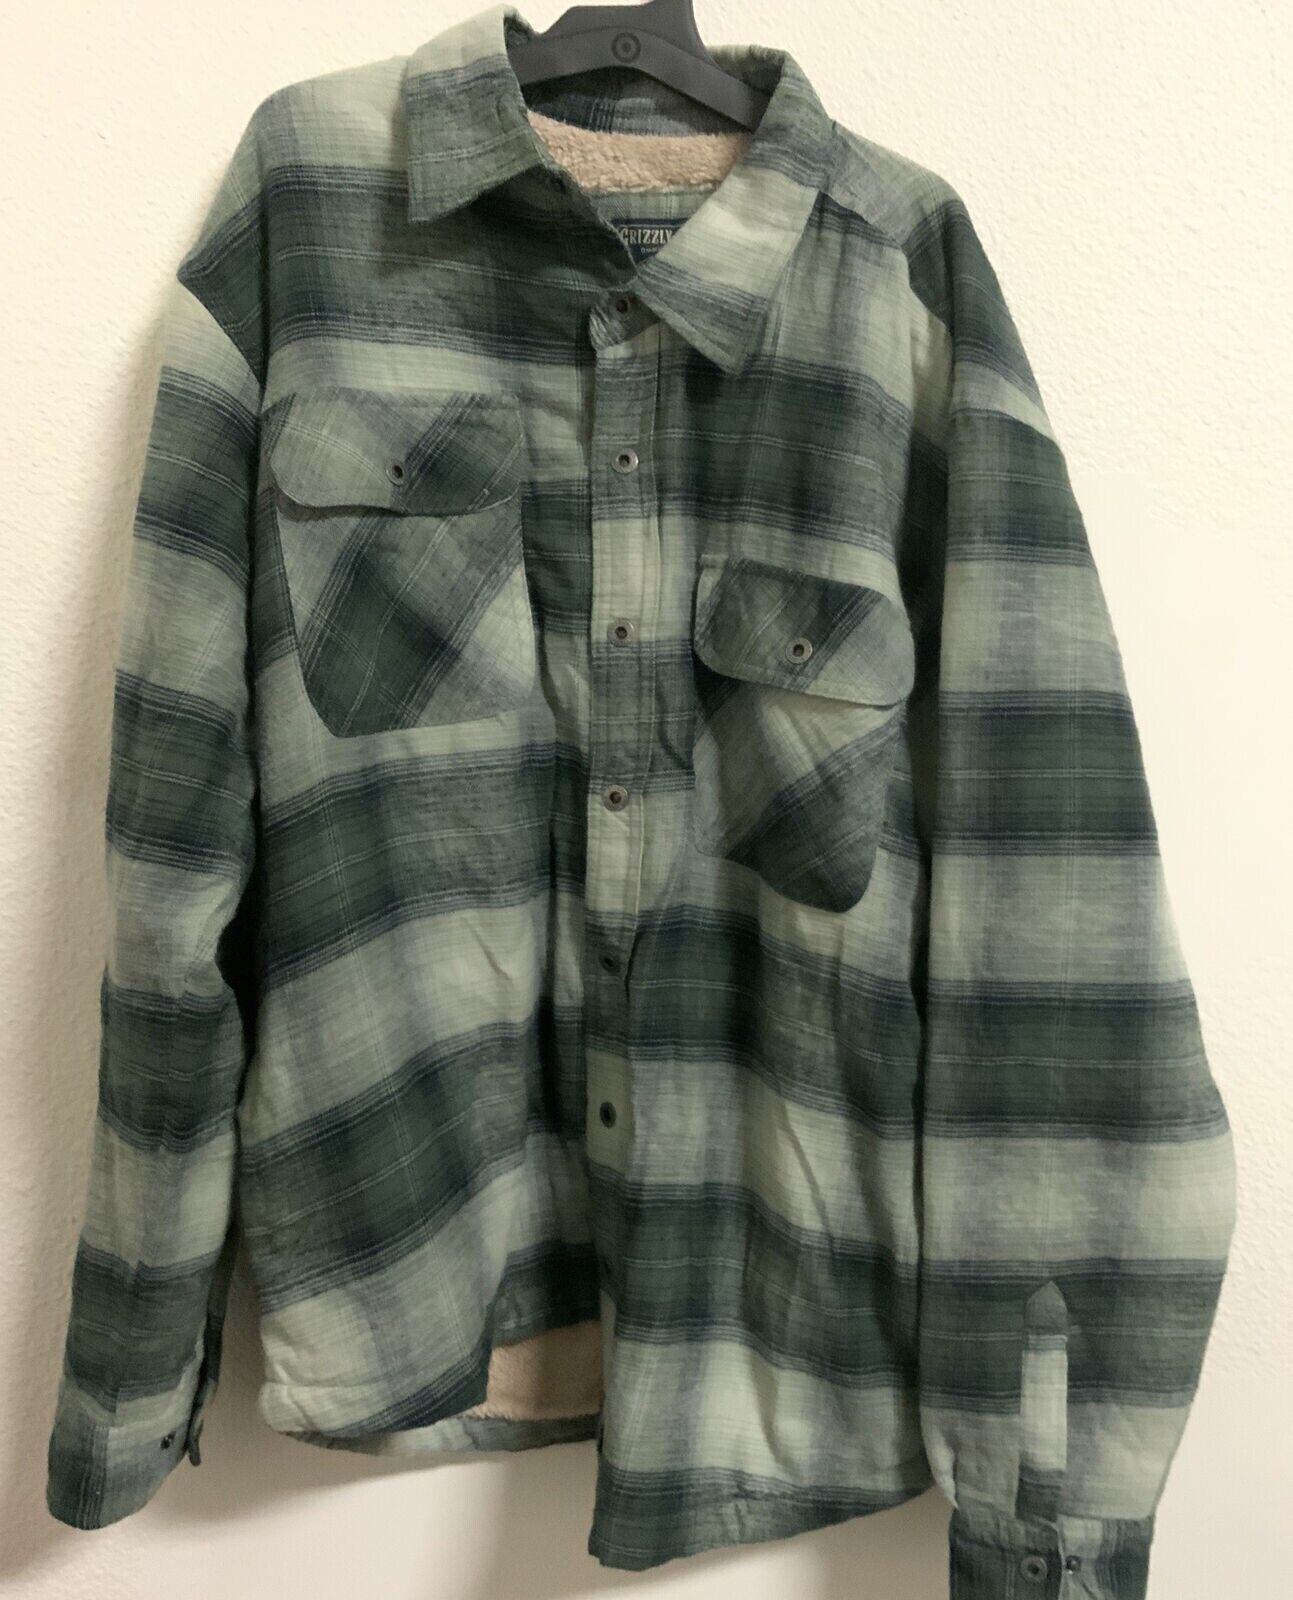 Primary image for Grizzly Mountain Men's Shirt Jacket Plaid Sherpa Fleece, Color: Green, Size: XL